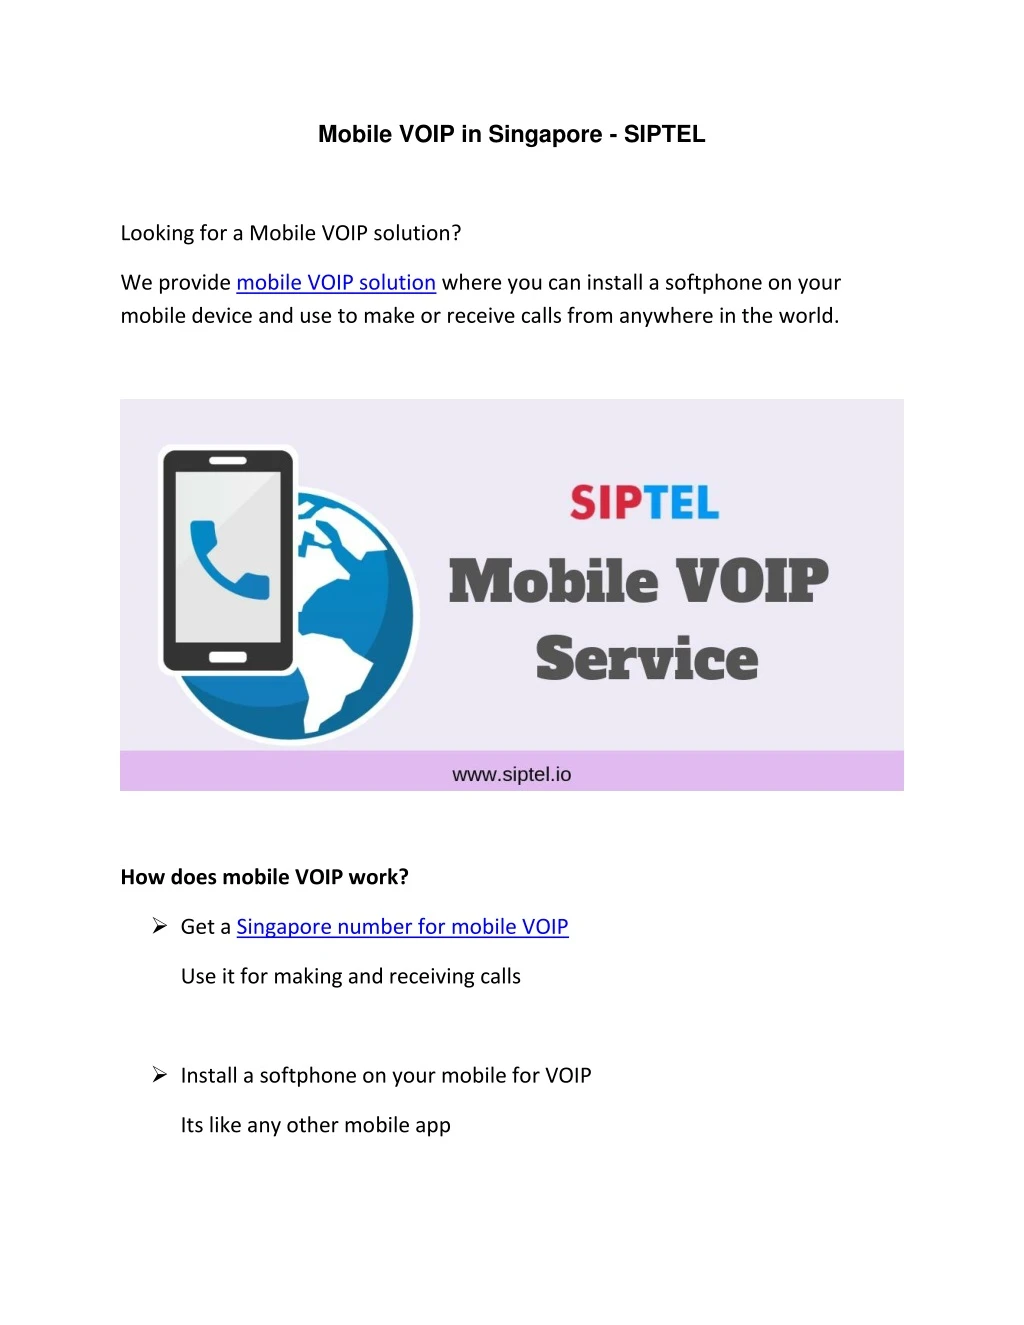 mobile voip in singapore siptel